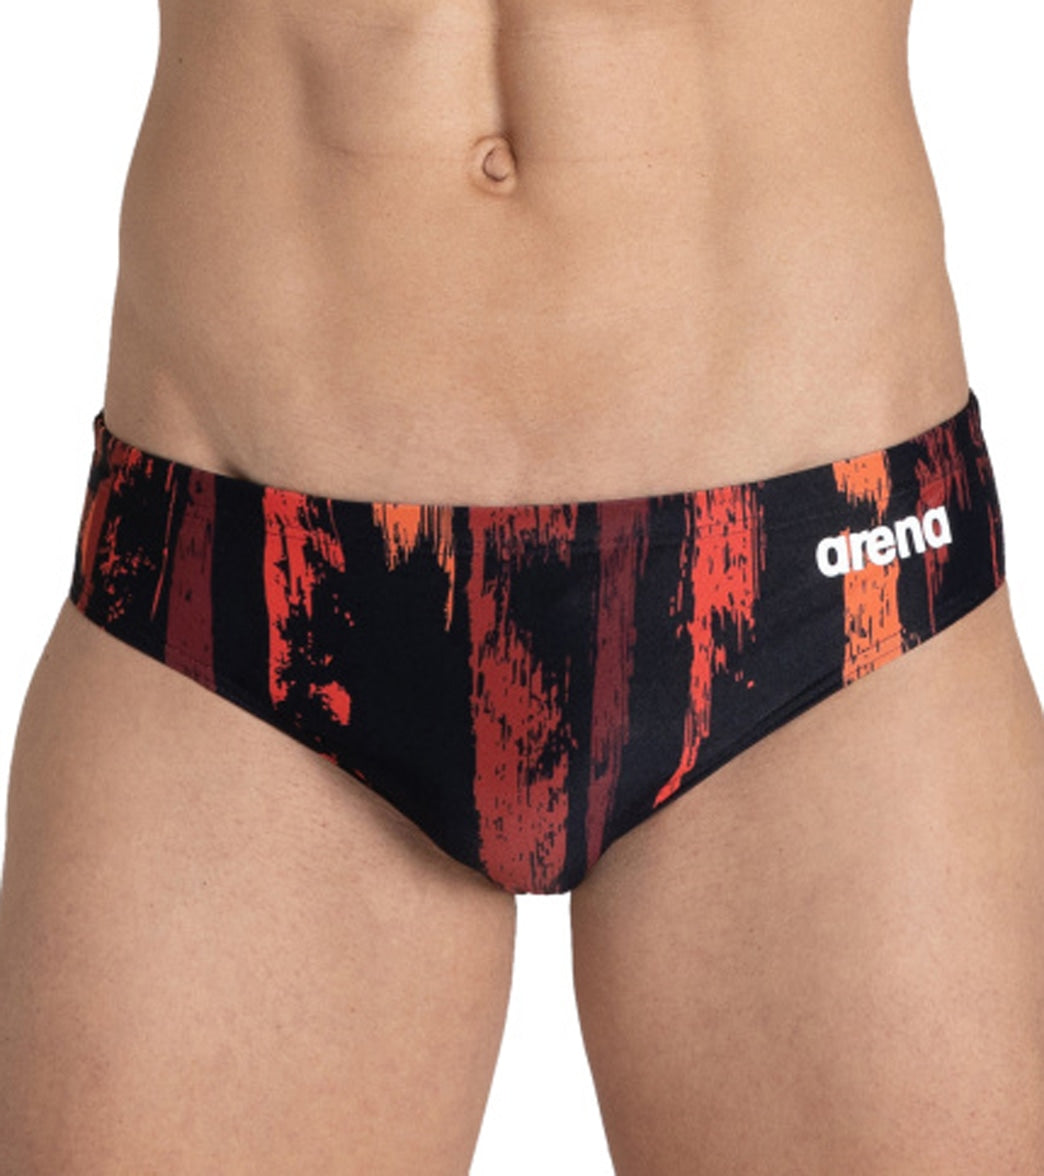 Arena Men's Team Painted Stripes Brief Swimsuit - Black/Multi Red 22 Polyester - Swimoutlet.com